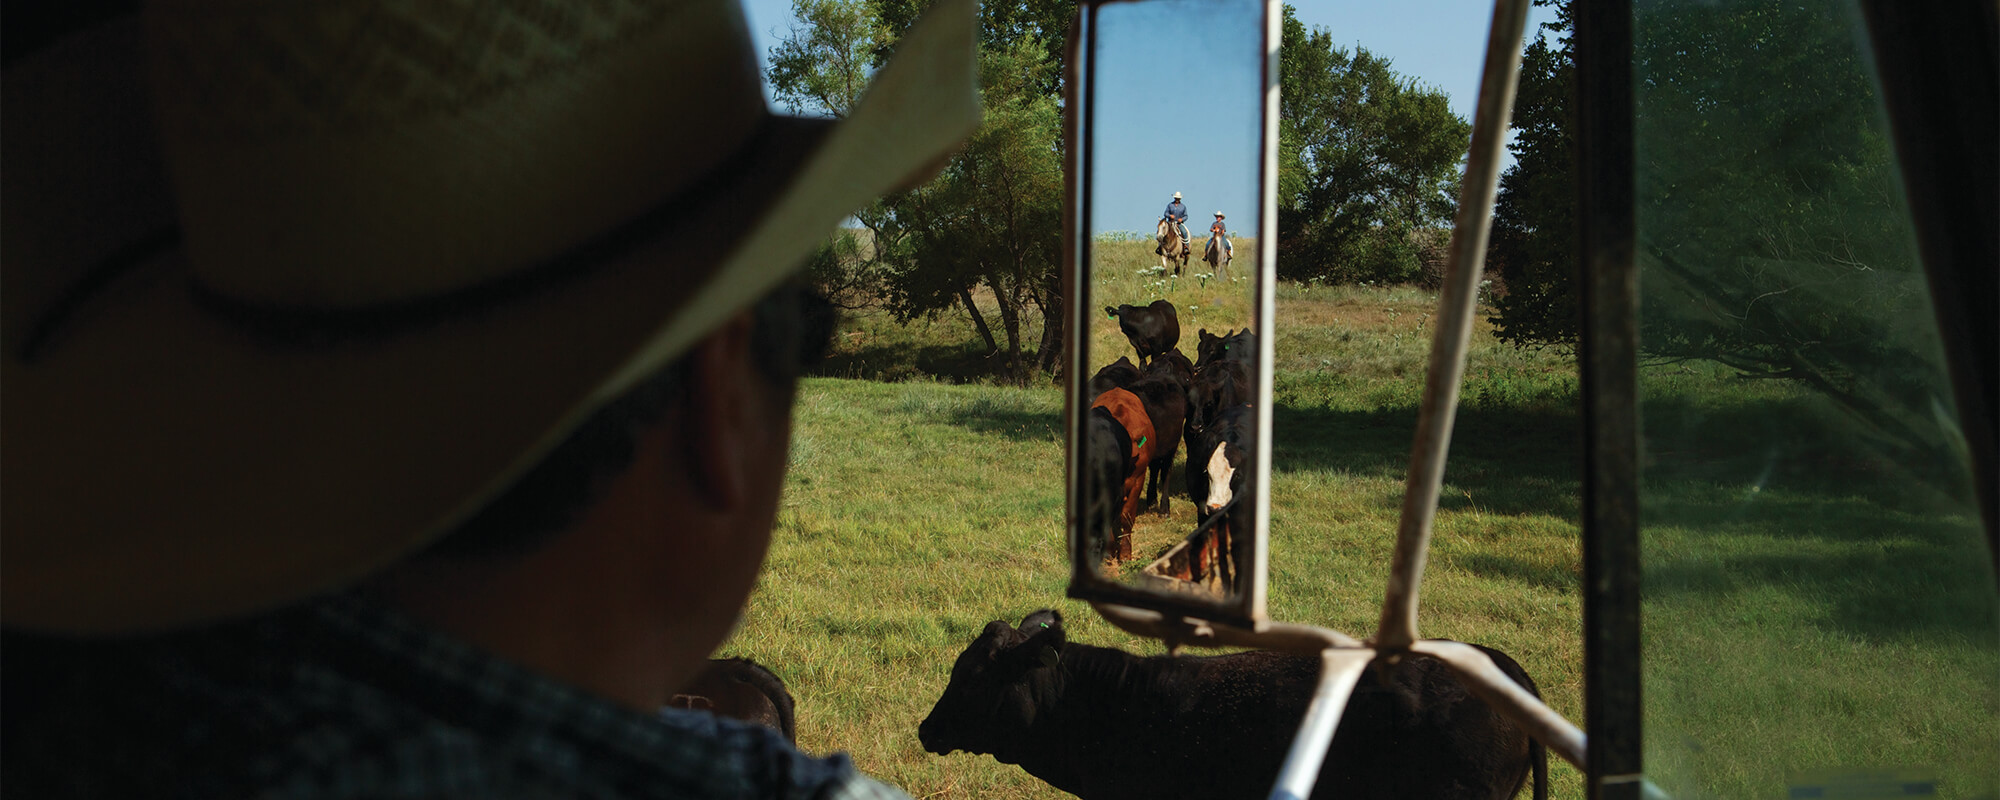 Ranchers and cattle in a pasture